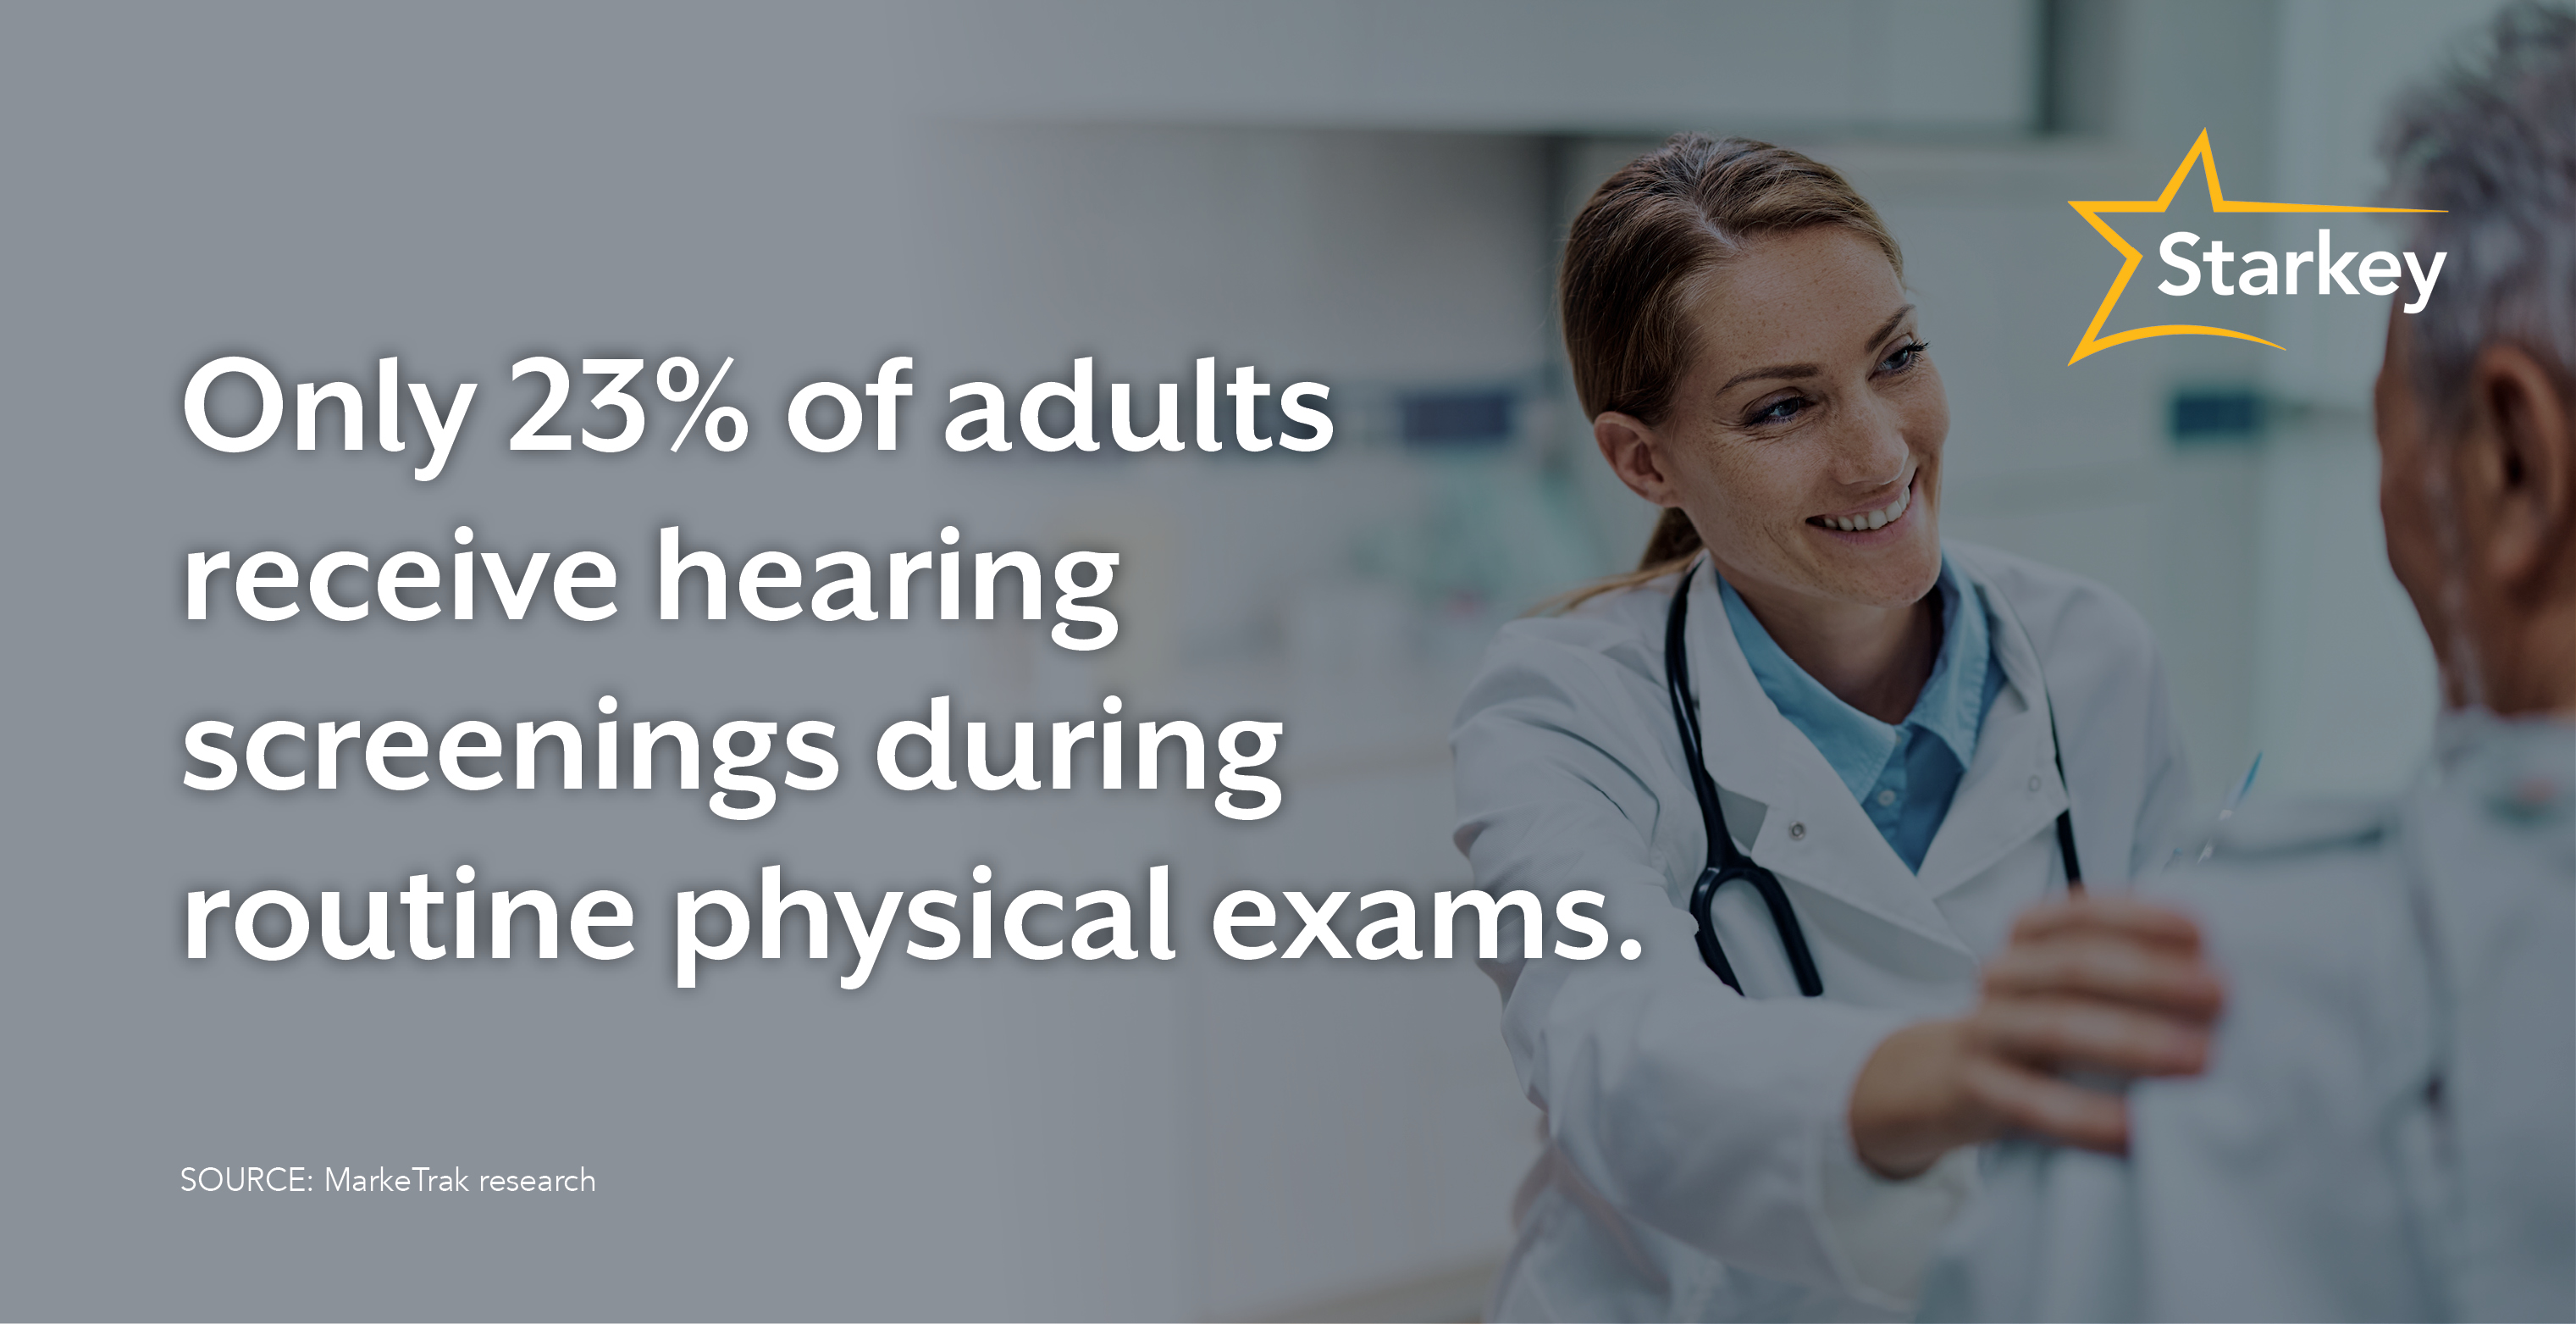 Image of factoid that reads "Only 23 percent of adults receive hearing screenings during routine physical exams."